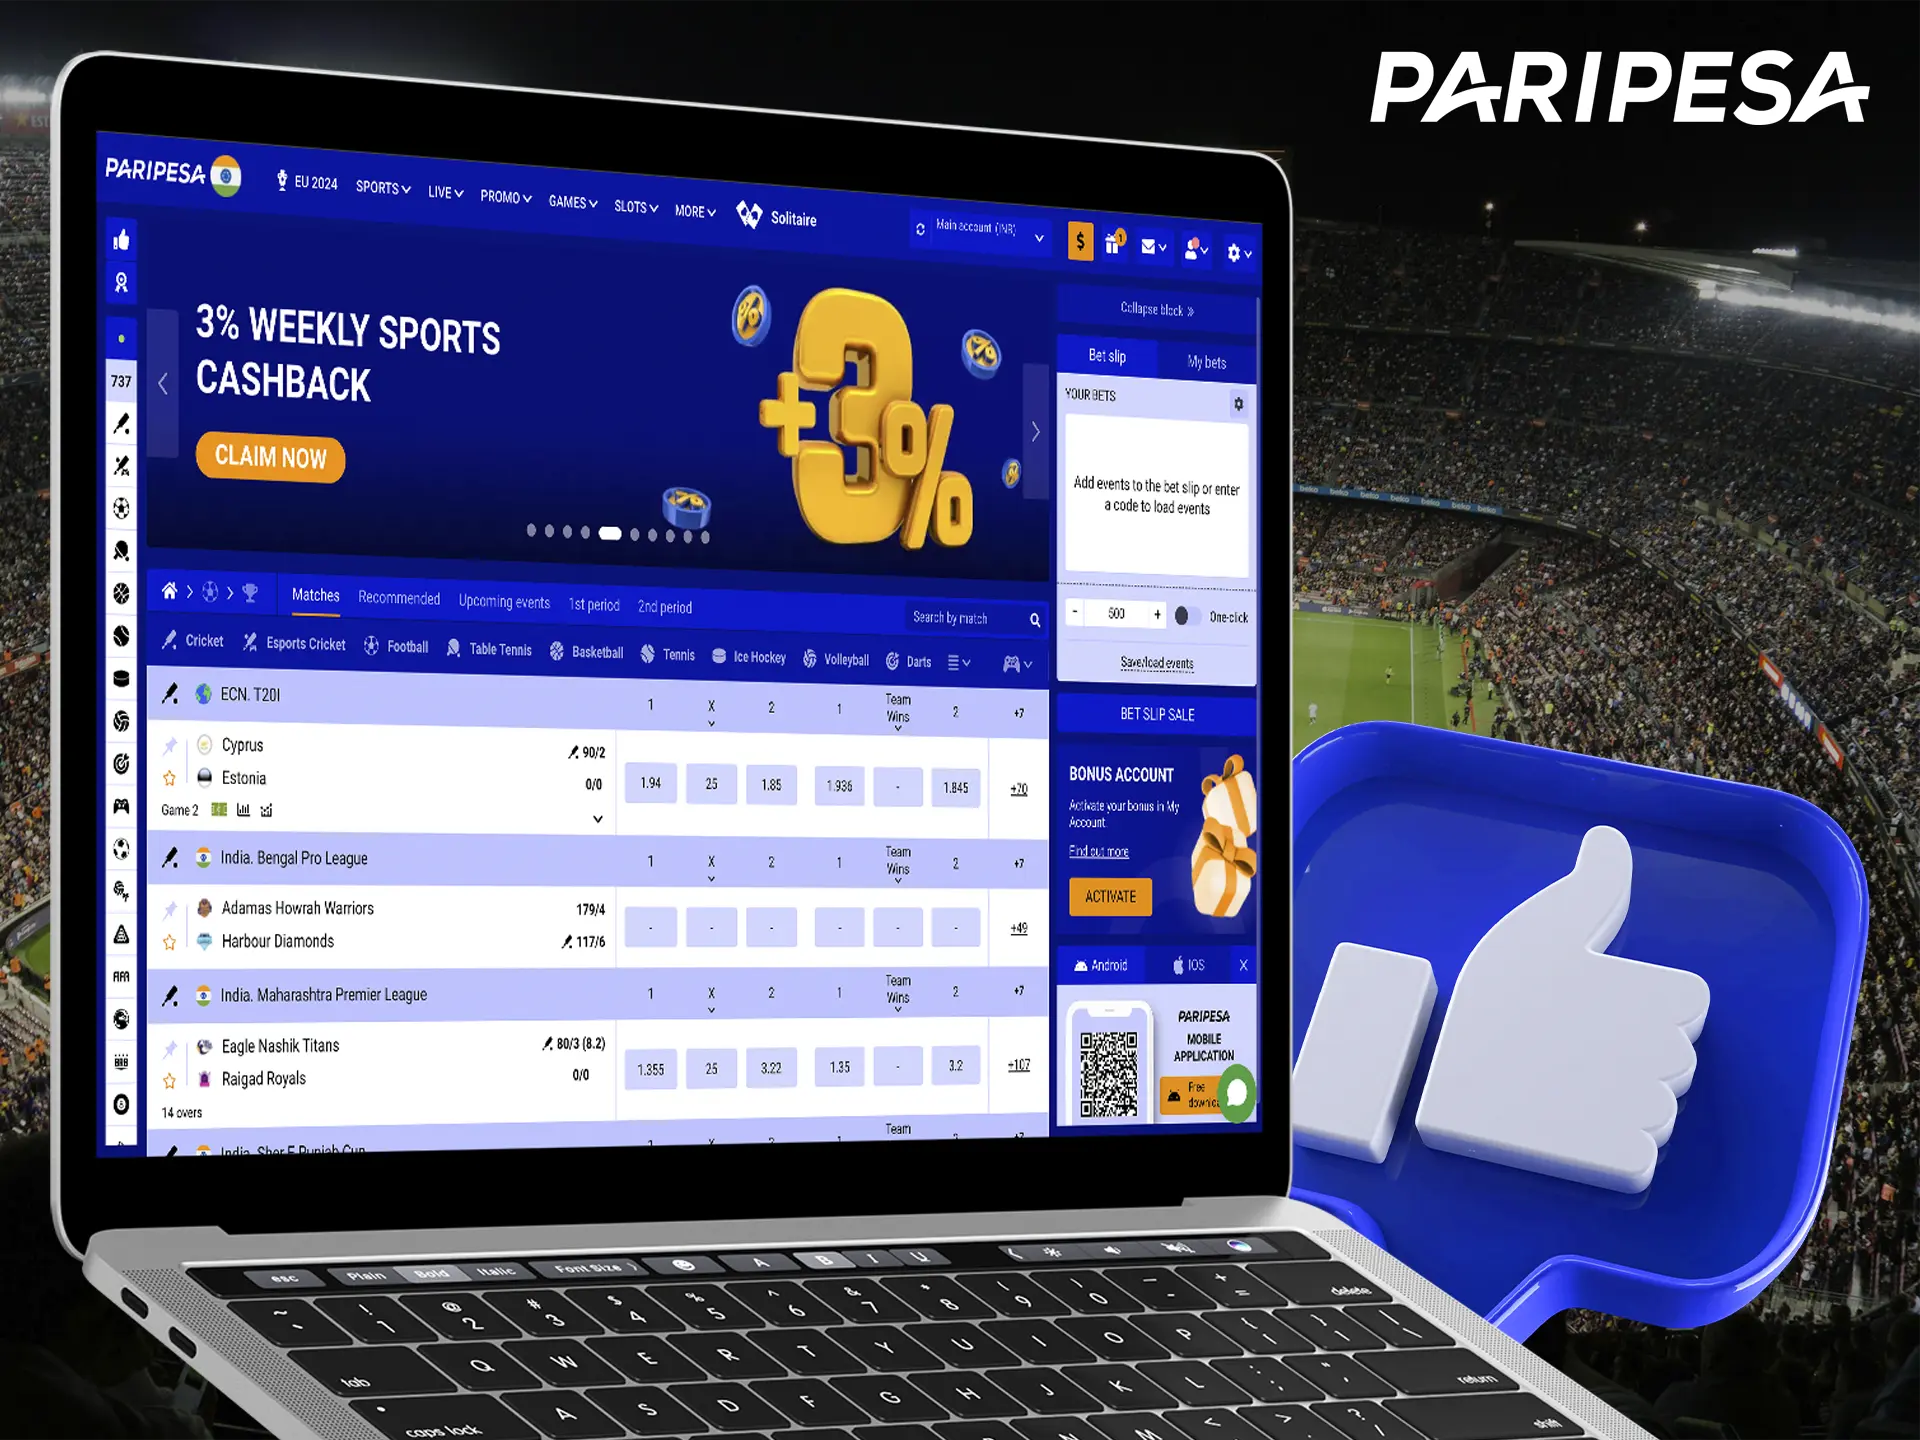 Paripesa is convenience and instant payouts as evidenced by the positive reviews from players.